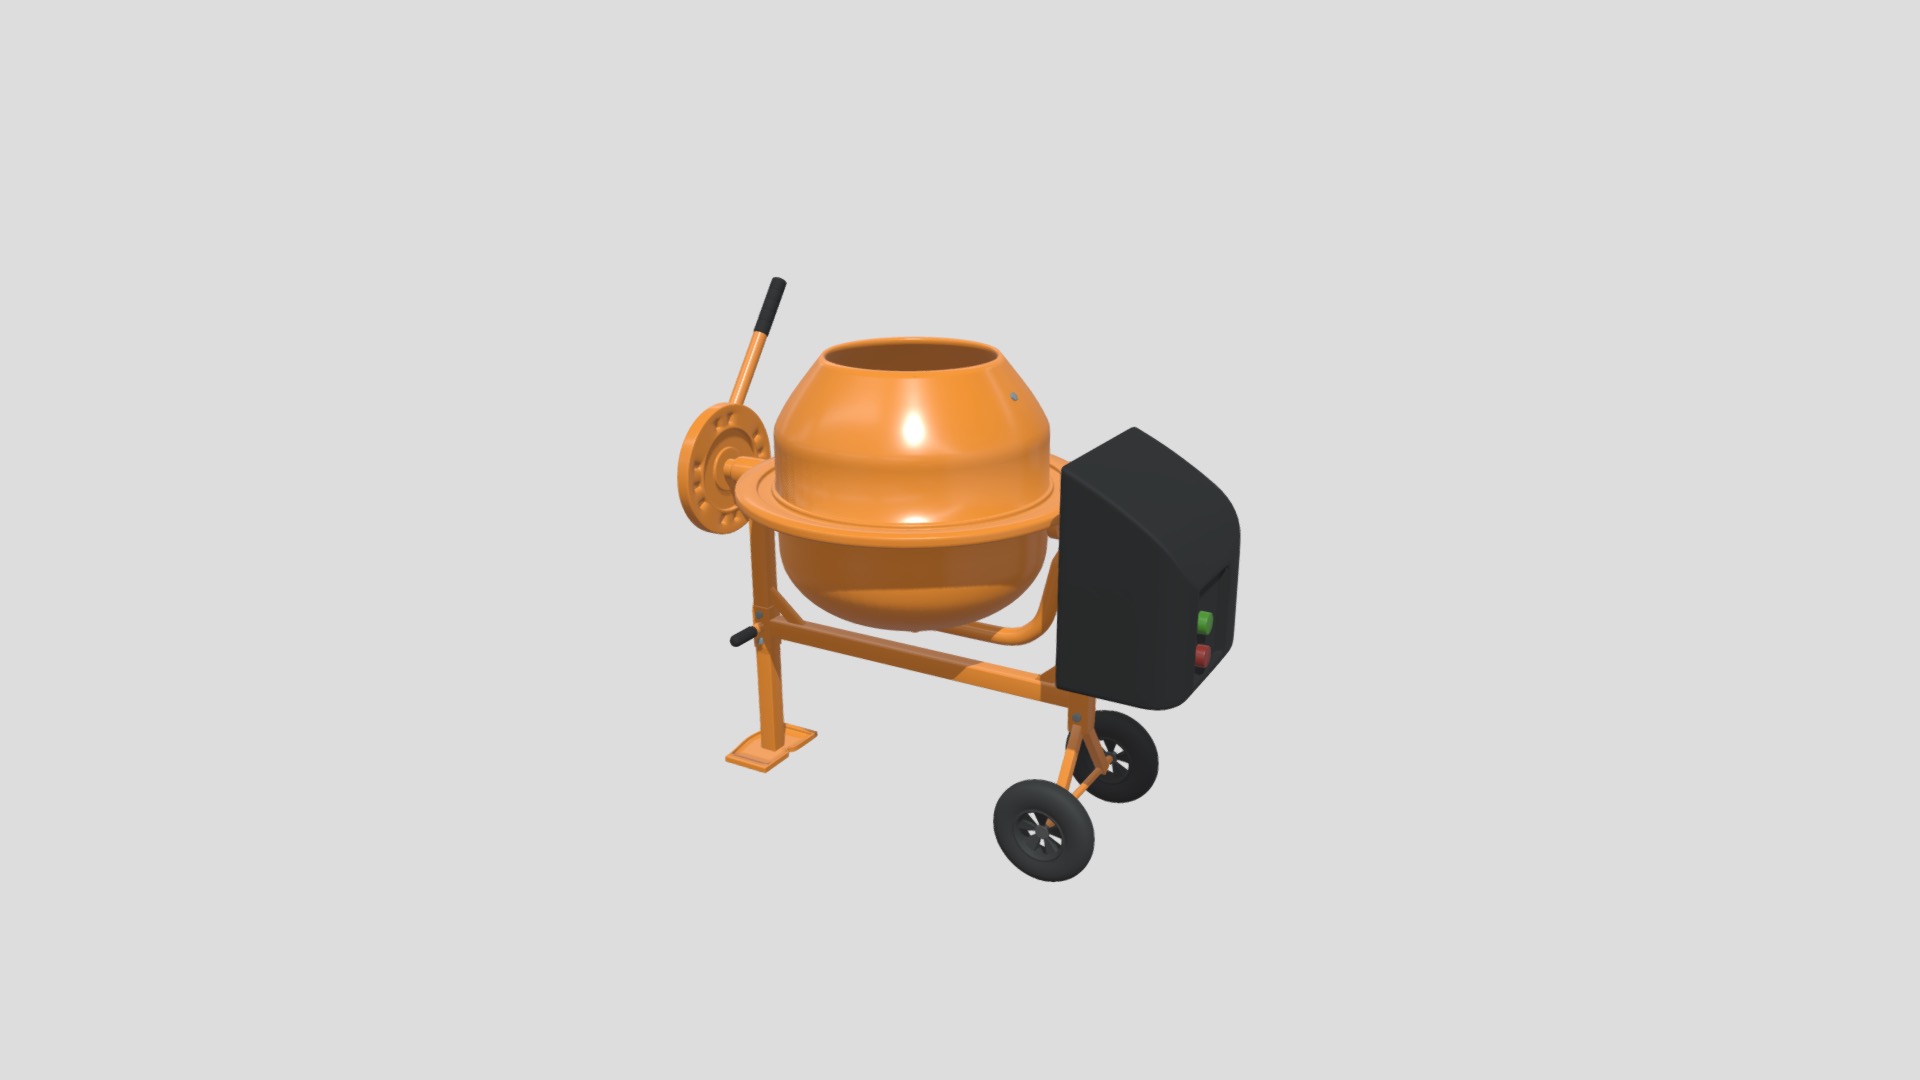 3D model Mini Concrete Mixer - This is a 3D model of the Mini Concrete Mixer. The 3D model is about a small orange and black chair.